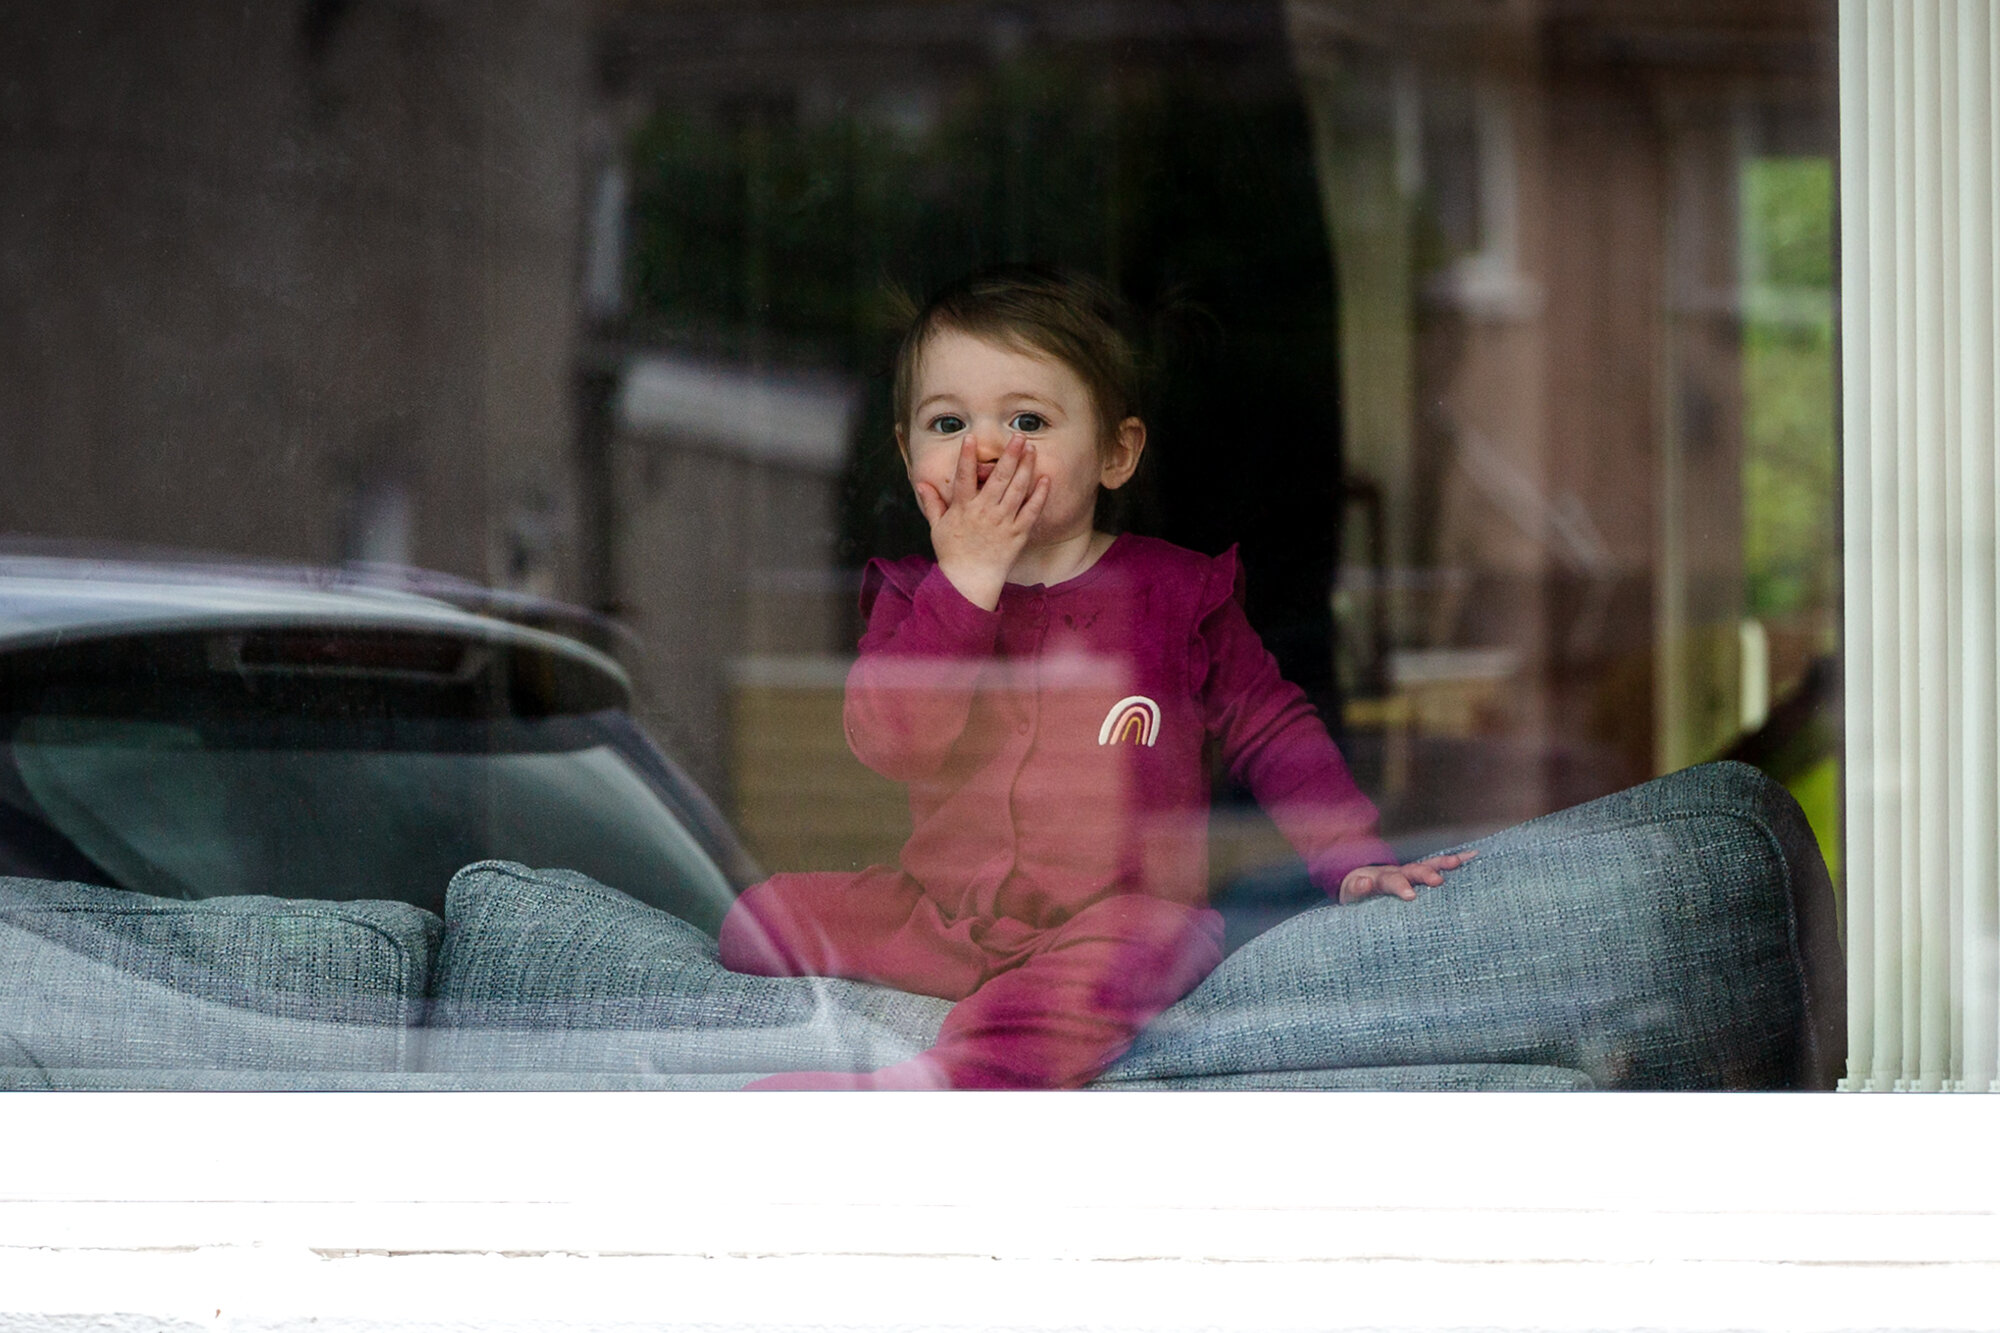 kisses brown through the window during the doorstep portrait challenge in covid 19